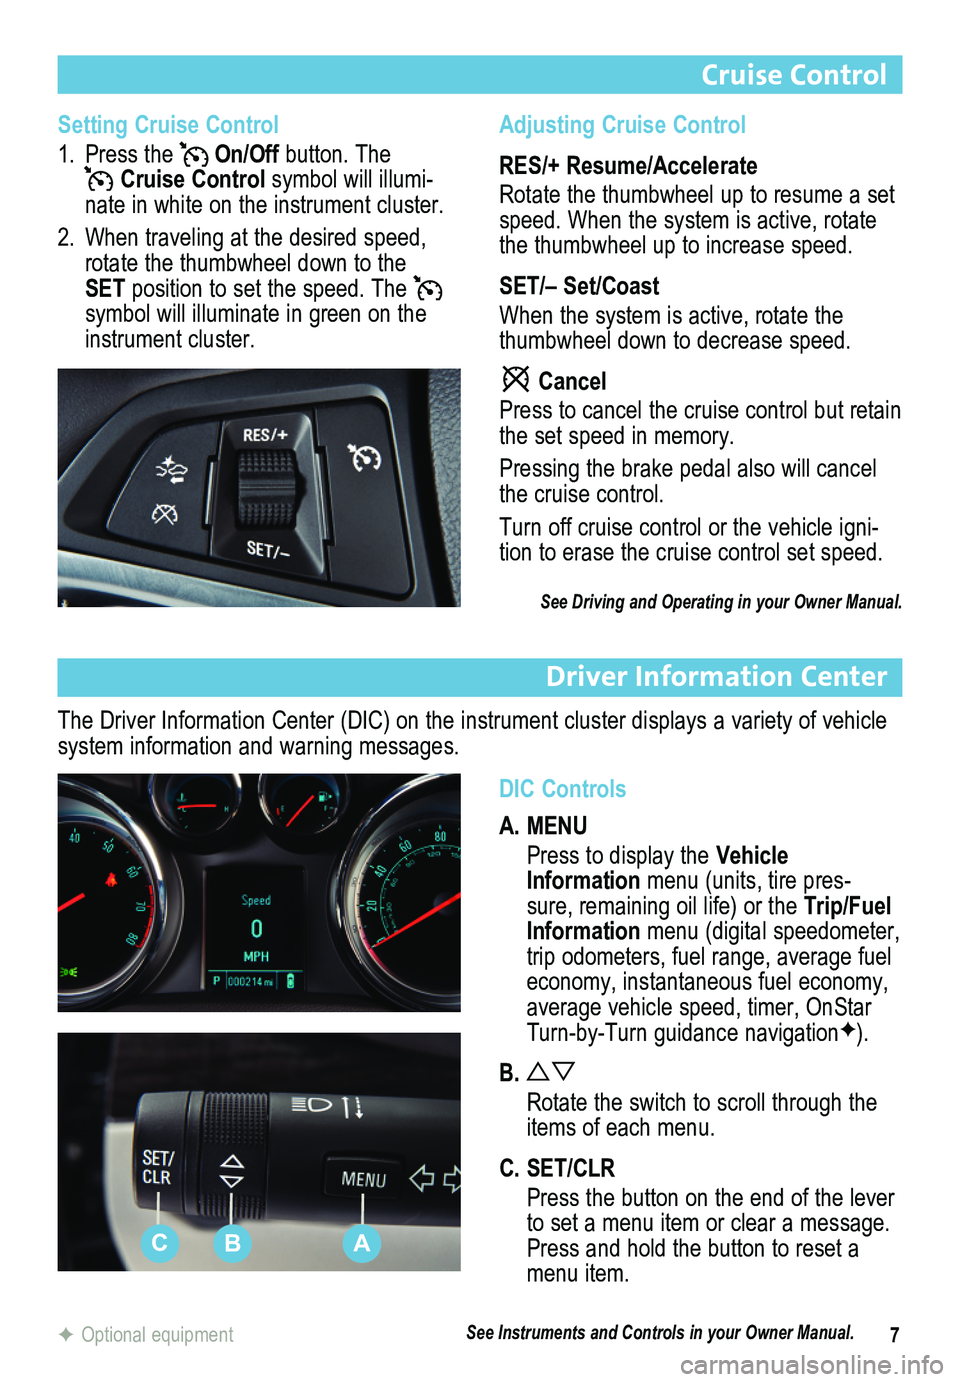 BUICK ENCORE 2014  Get To Know Guide 7
Cruise Control
Driver Information Center
DIC Controls
A. MENU
 Press to display the Vehicle Information menu (units, tire pres-sure, remaining oil life) or the Trip/Fuel Information menu (digital sp